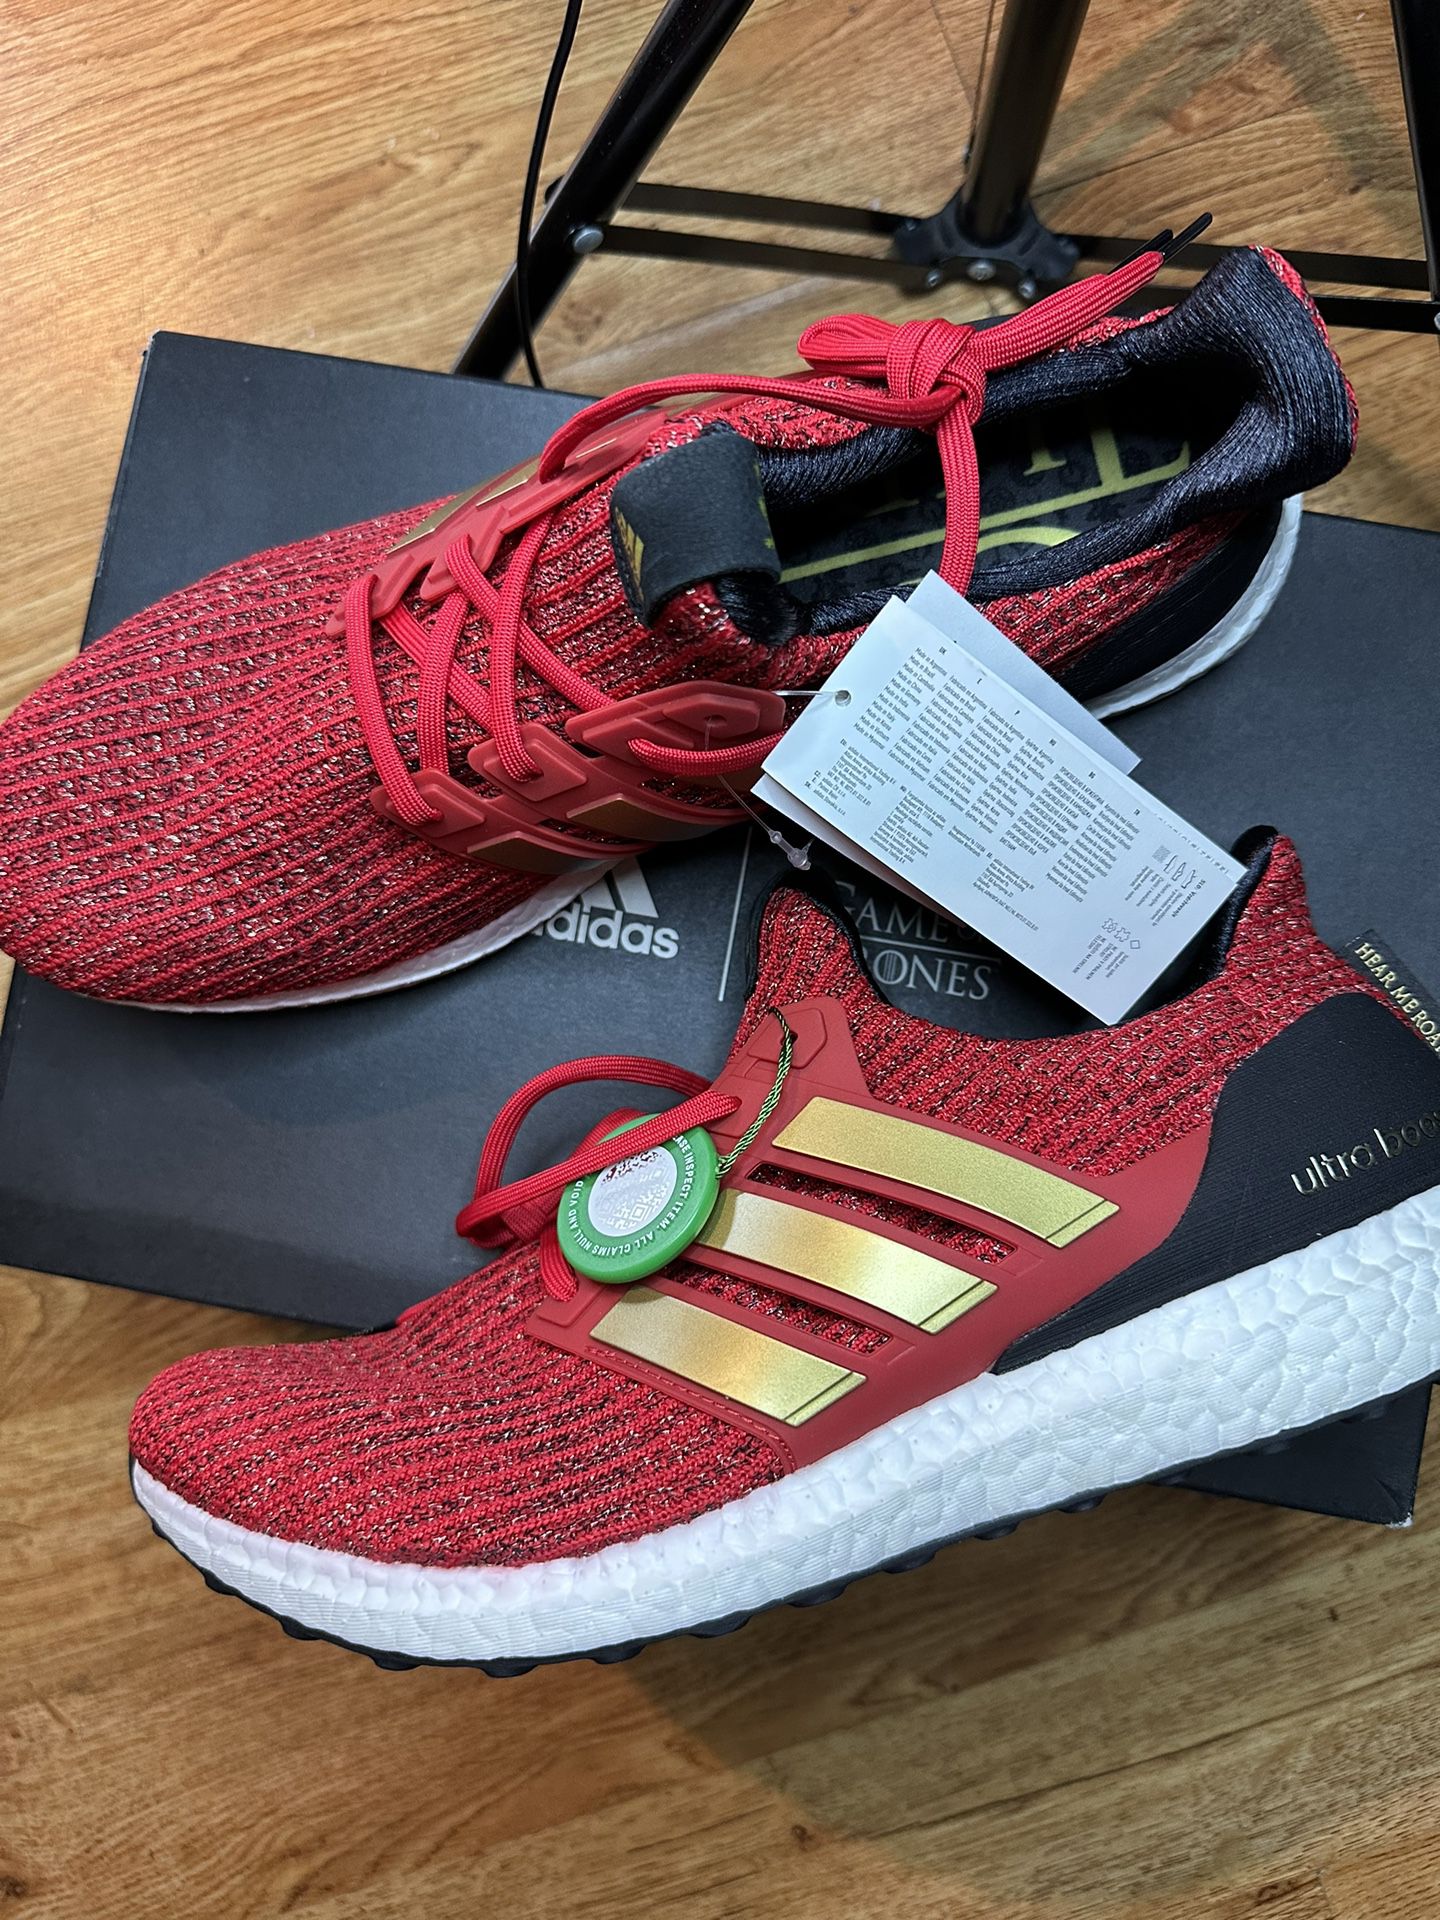 strategi lugt hektar NEW Adidas ULTRA BOOST Game Of Thrones Size M 12 / W 13.5 Lannister for  Sale in Irwindale, CA - OfferUp